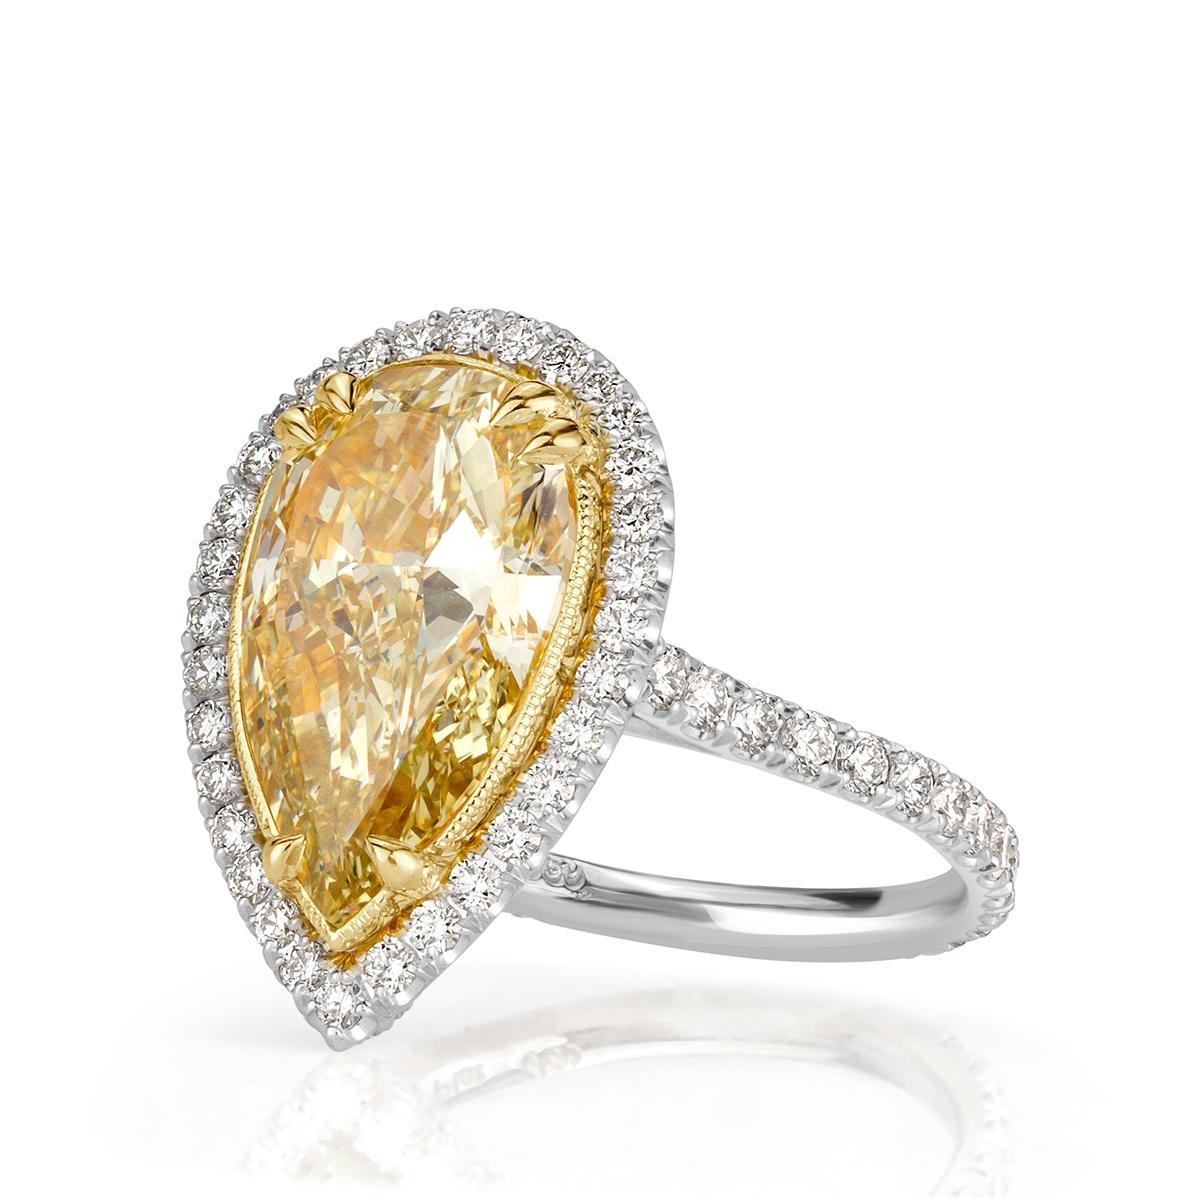 This stunning diamond engagement ring showcases a one-of-a-kind 4.06ct pear shaped center diamond, GIA certified at fancy light yellow-SI1. It radiates a vibrant canary color and is perfectly eye clean in addition of having incredible measurements